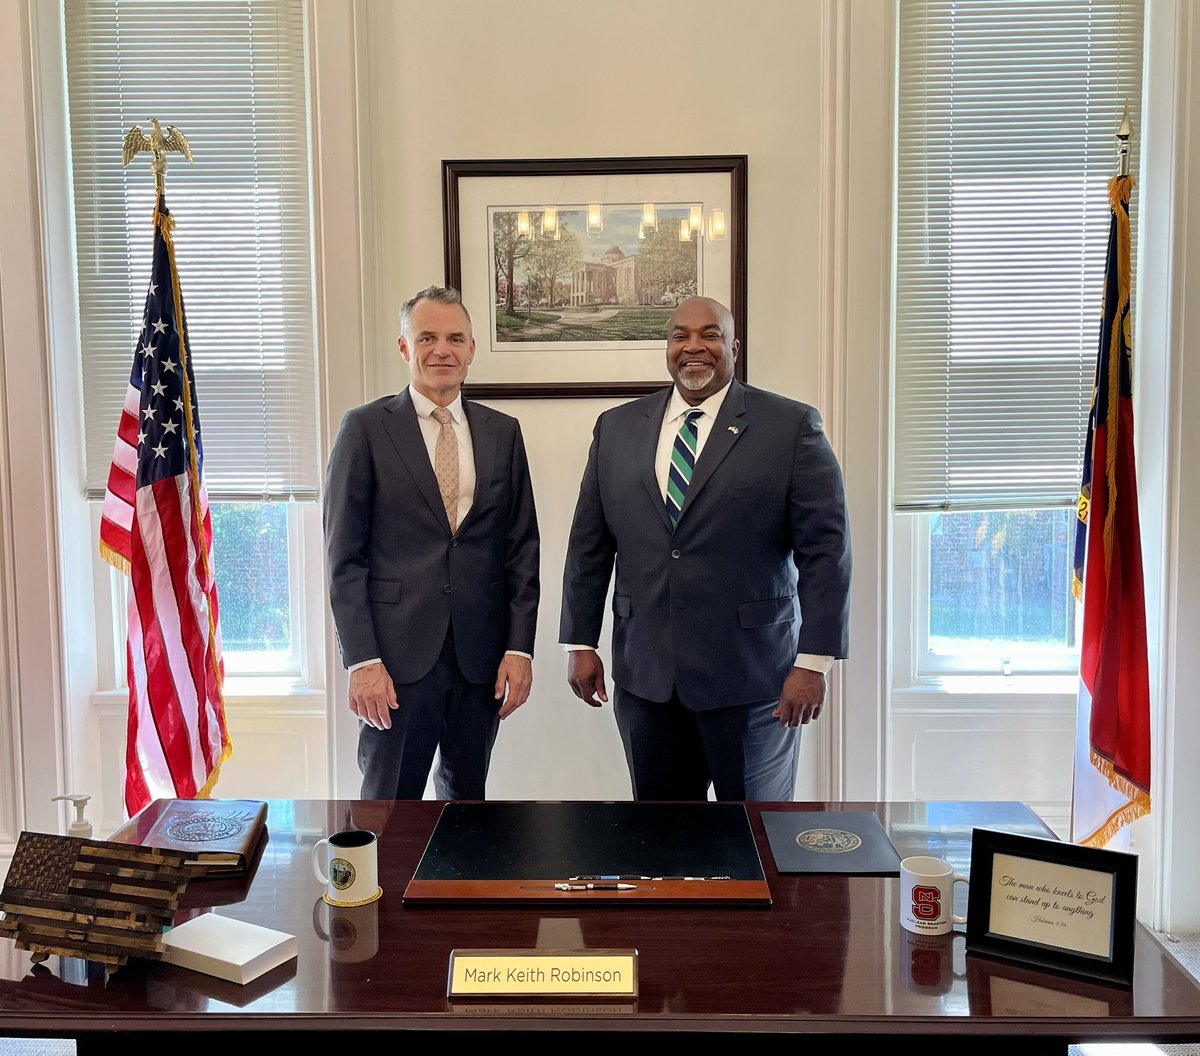 Gained fascinating perspectives from Lieutenant Governor @MarkRobinsonNC on North Carolina’s challenges & politics. We discussed potential opportunities for enhancing our economic cooperation, also in life sciences & energy